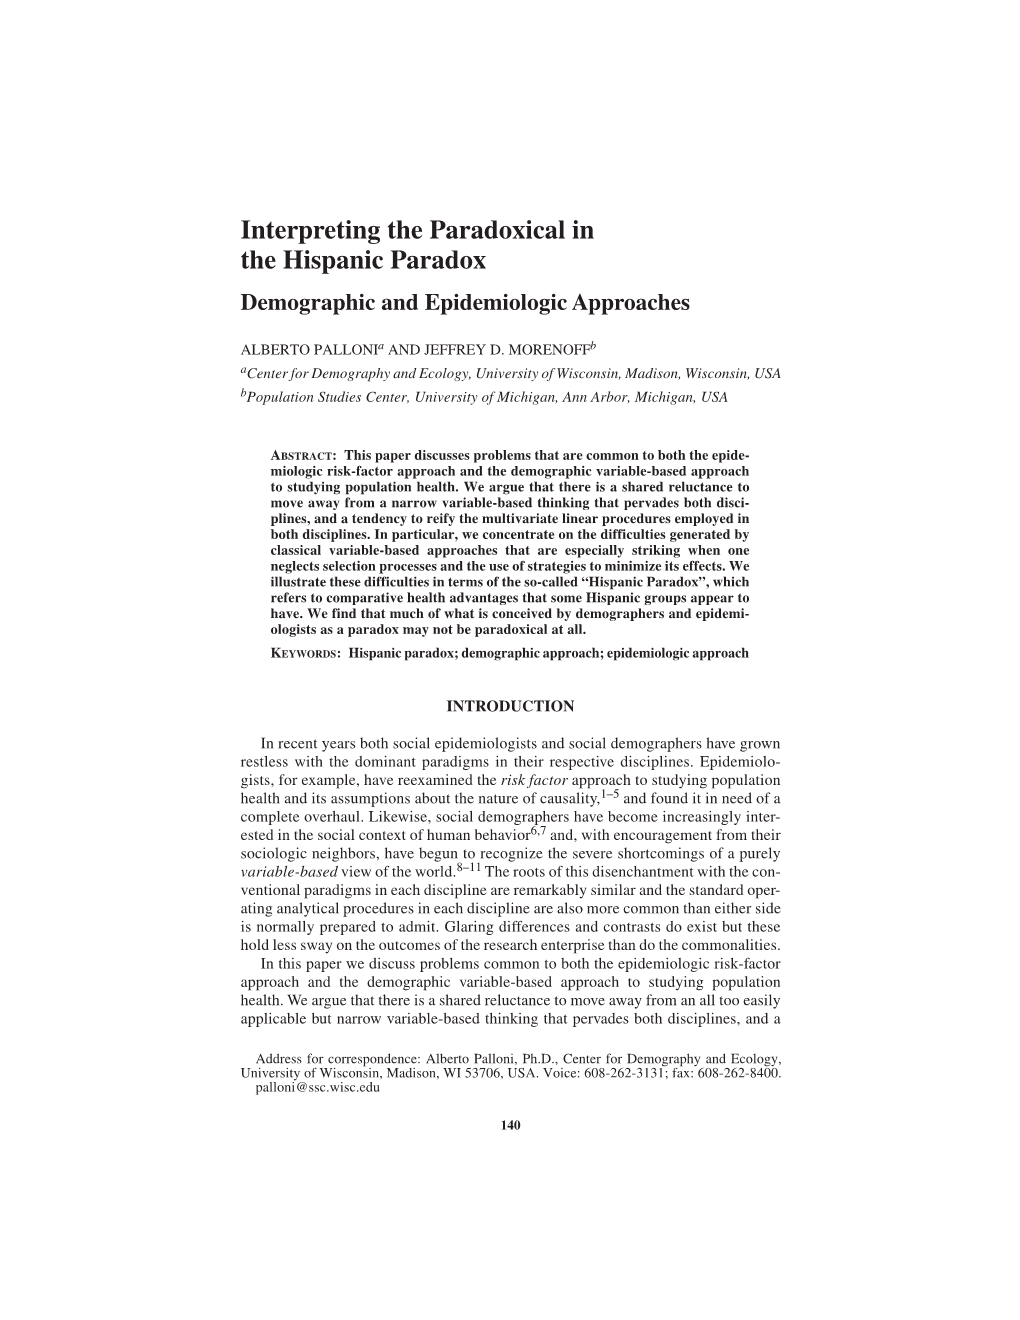 Interpreting the Paradoxical in the Hispanic Paradox Demographic and Epidemiologic Approaches